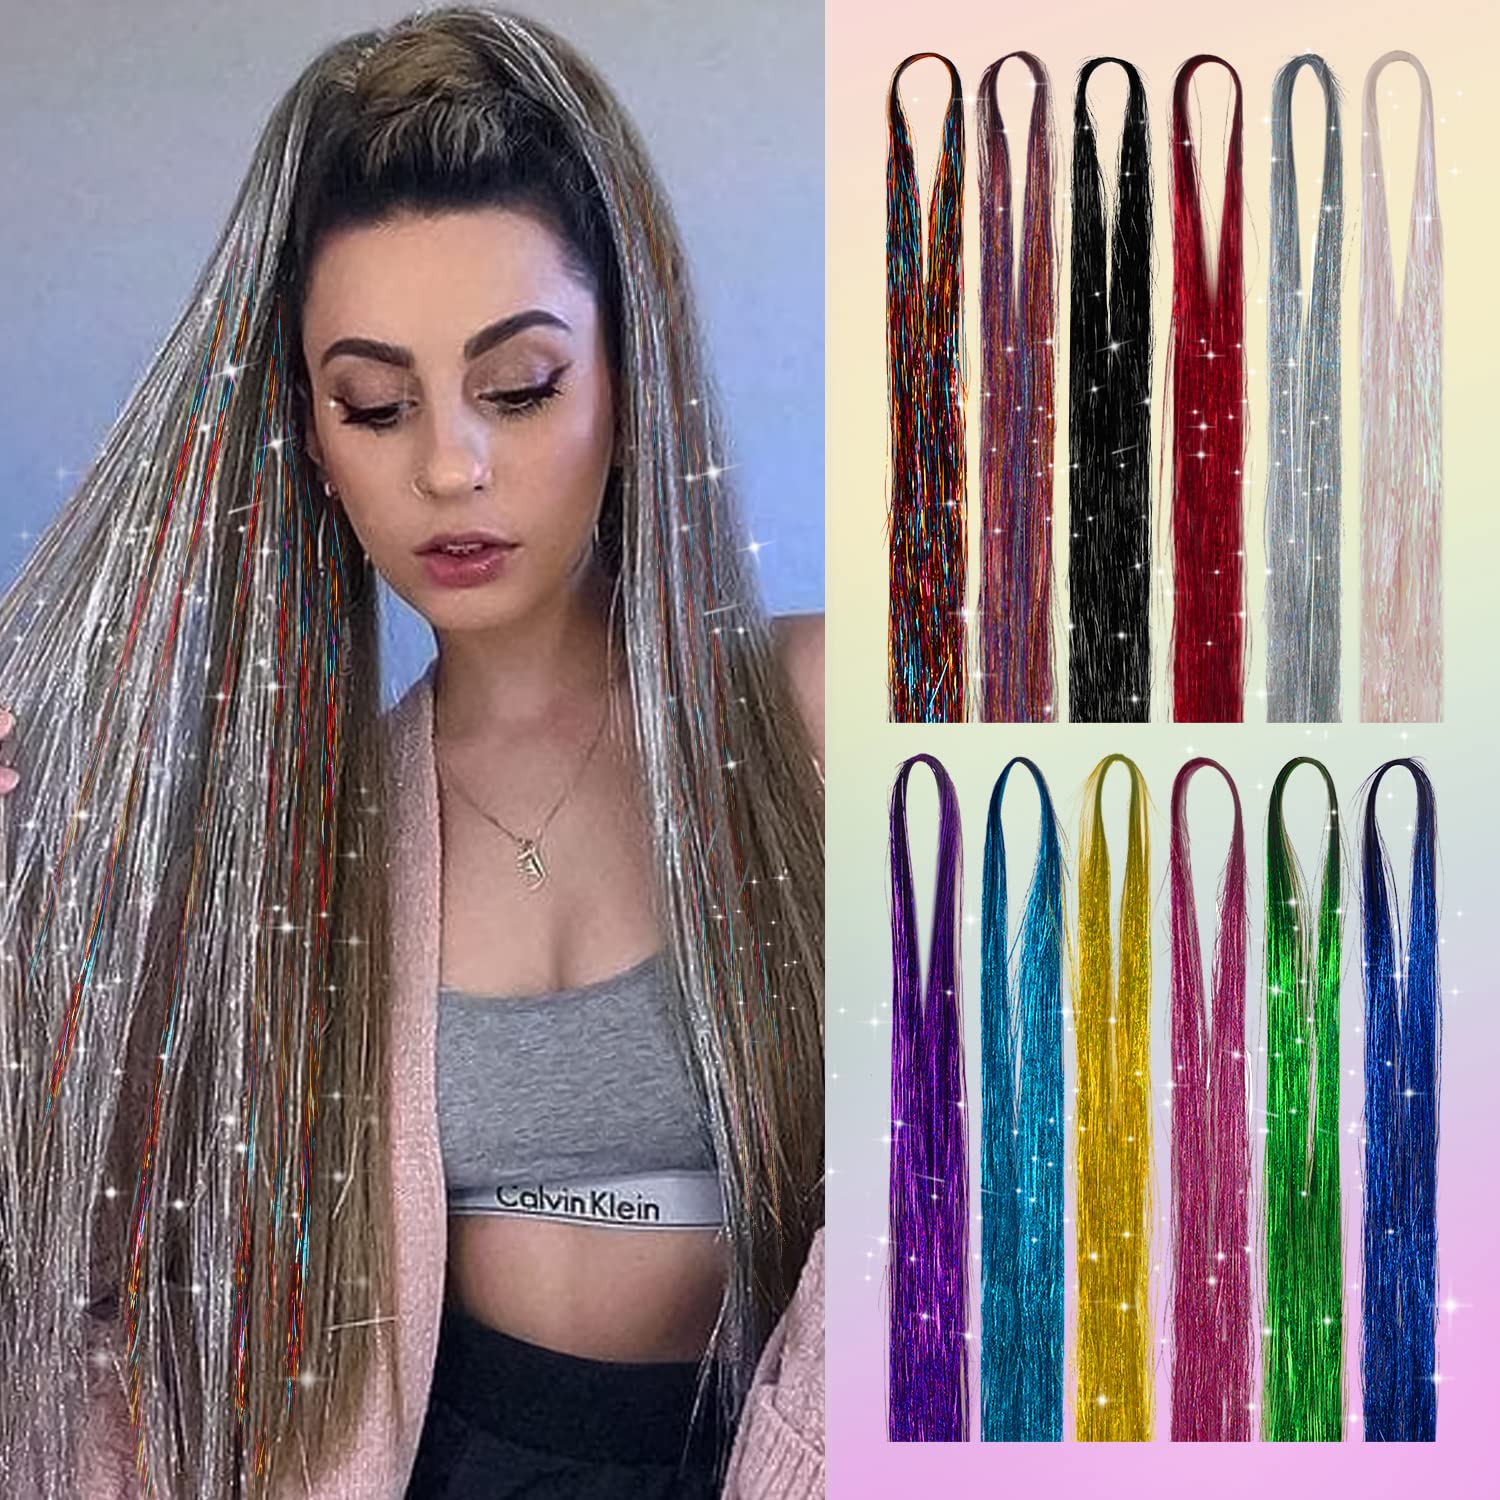 NIACONN 18 Colors Fairy Hair Tinsel Kit, 48 inch 3600 Strands Glitter Tinsel Hair Extensions for Girls Womens Christmas New Year Halloween Cosplay